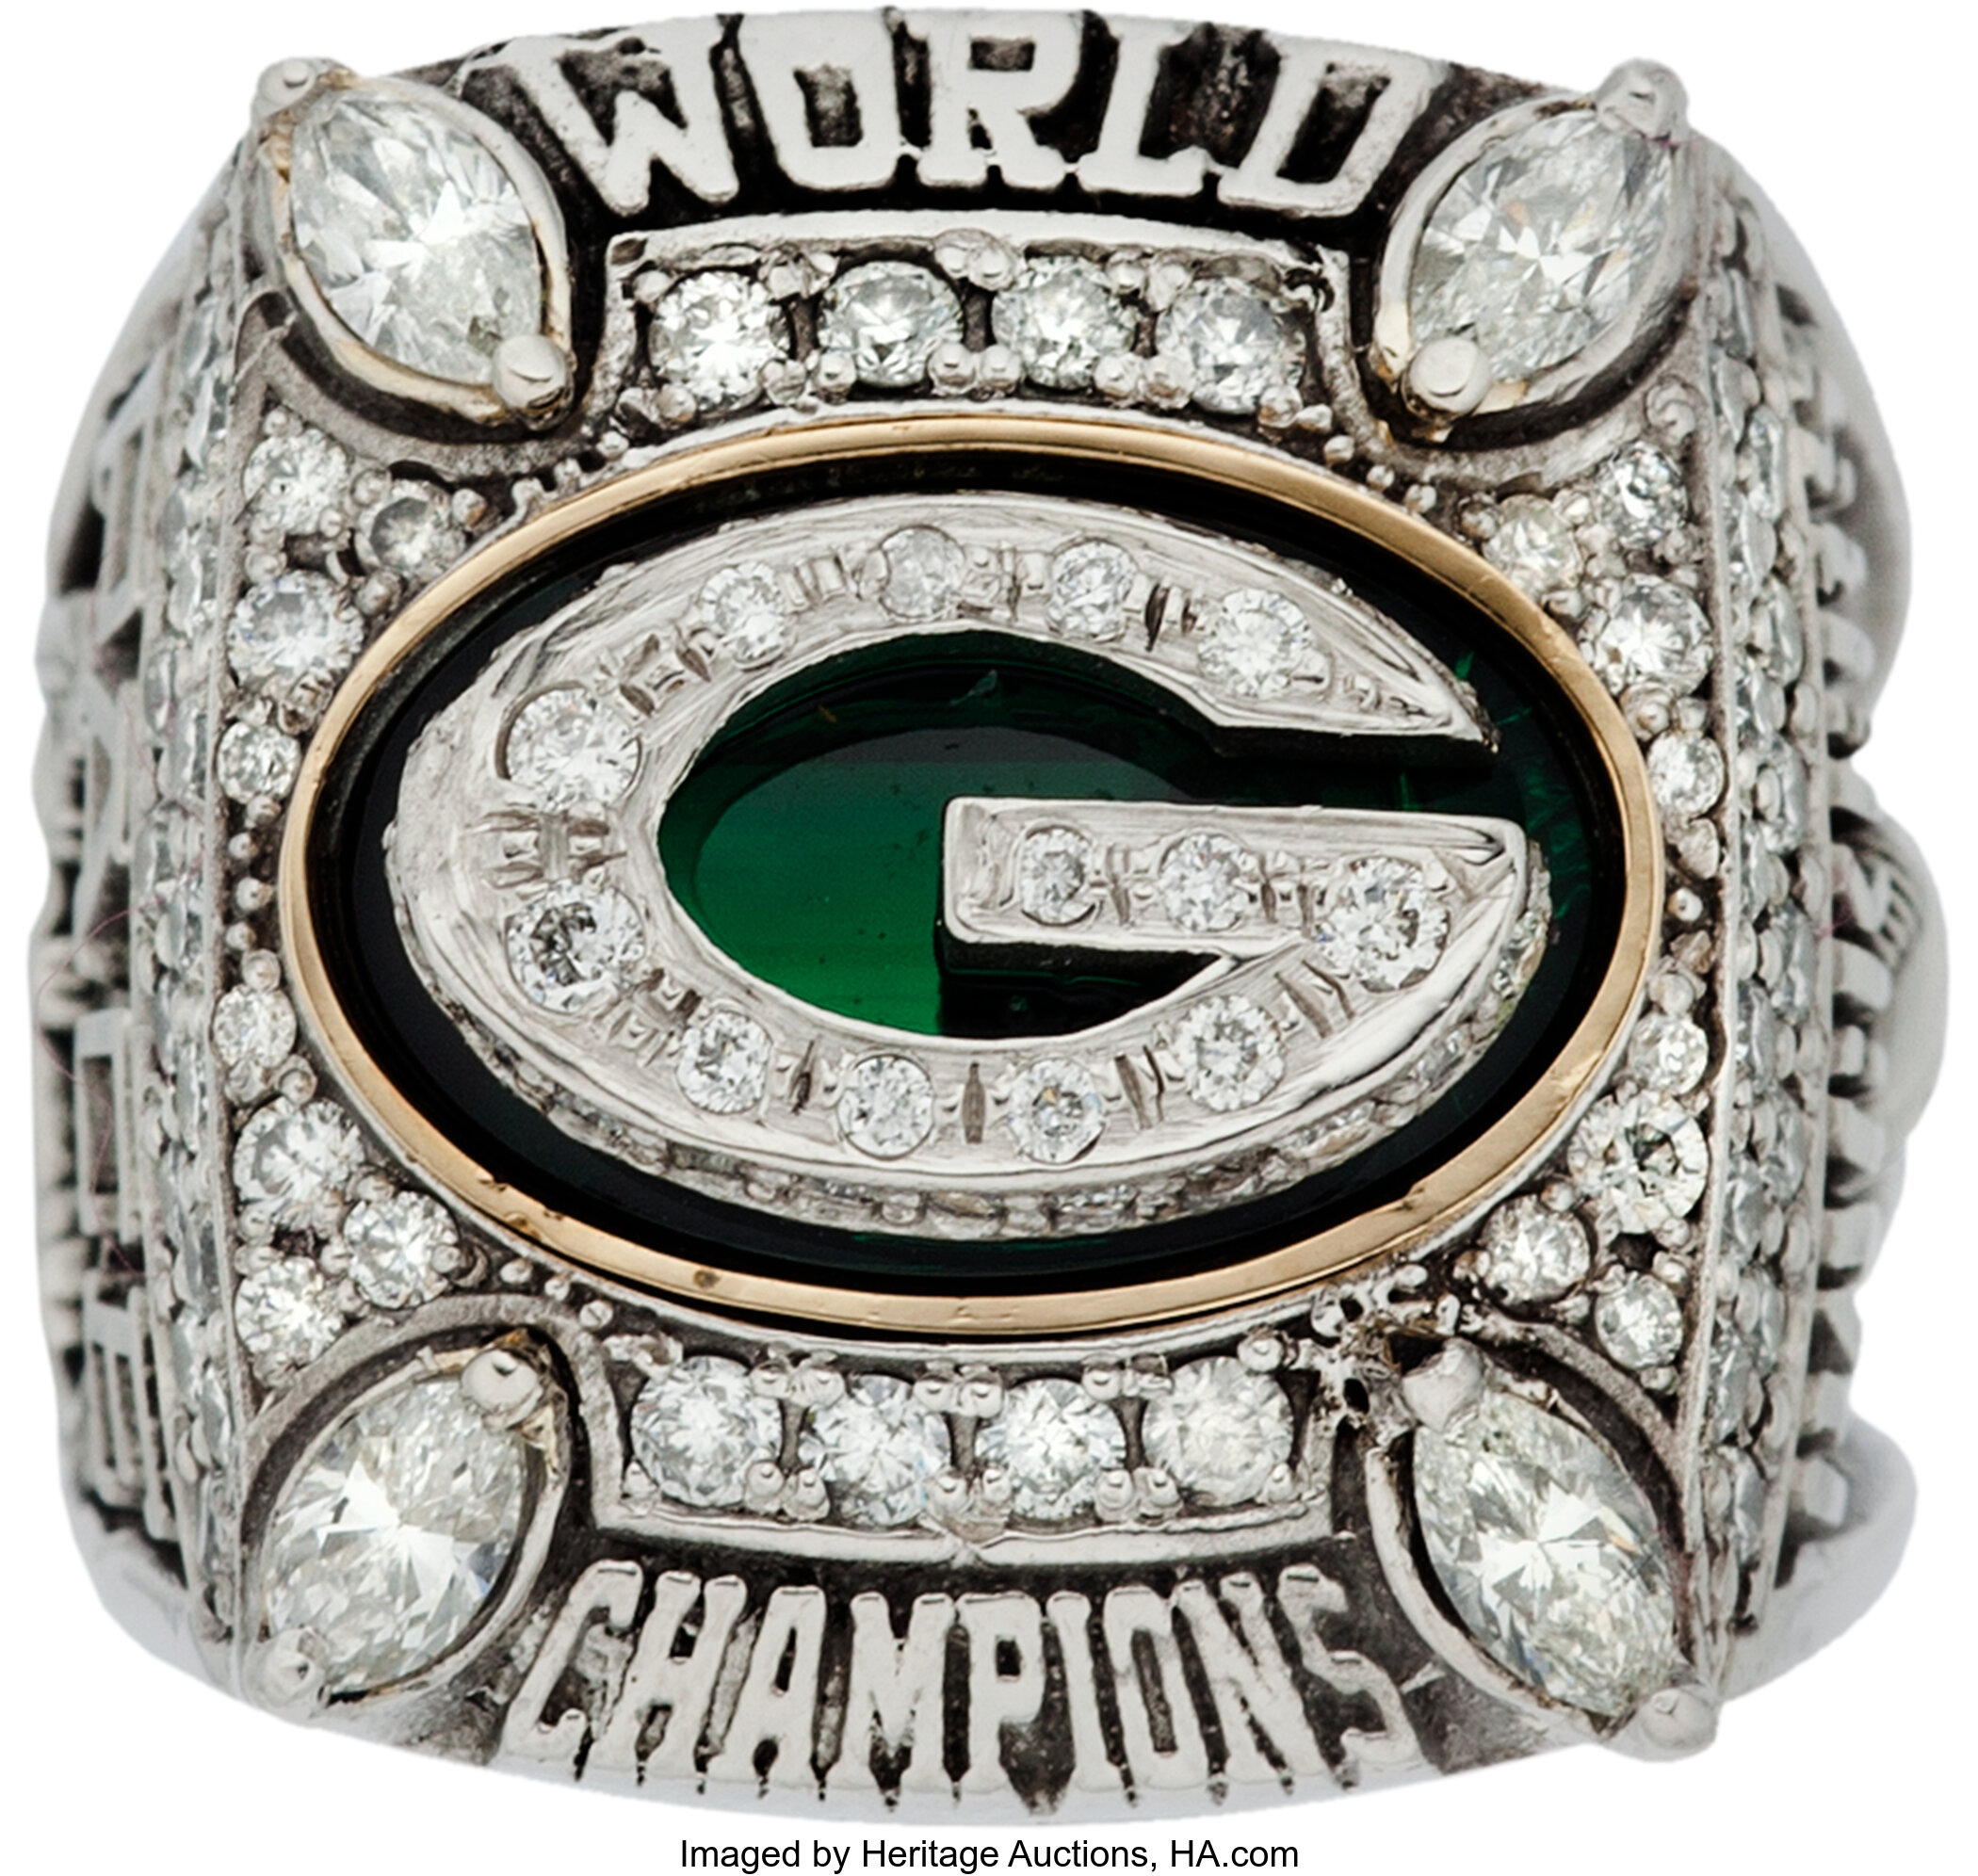 packers super bowl championships